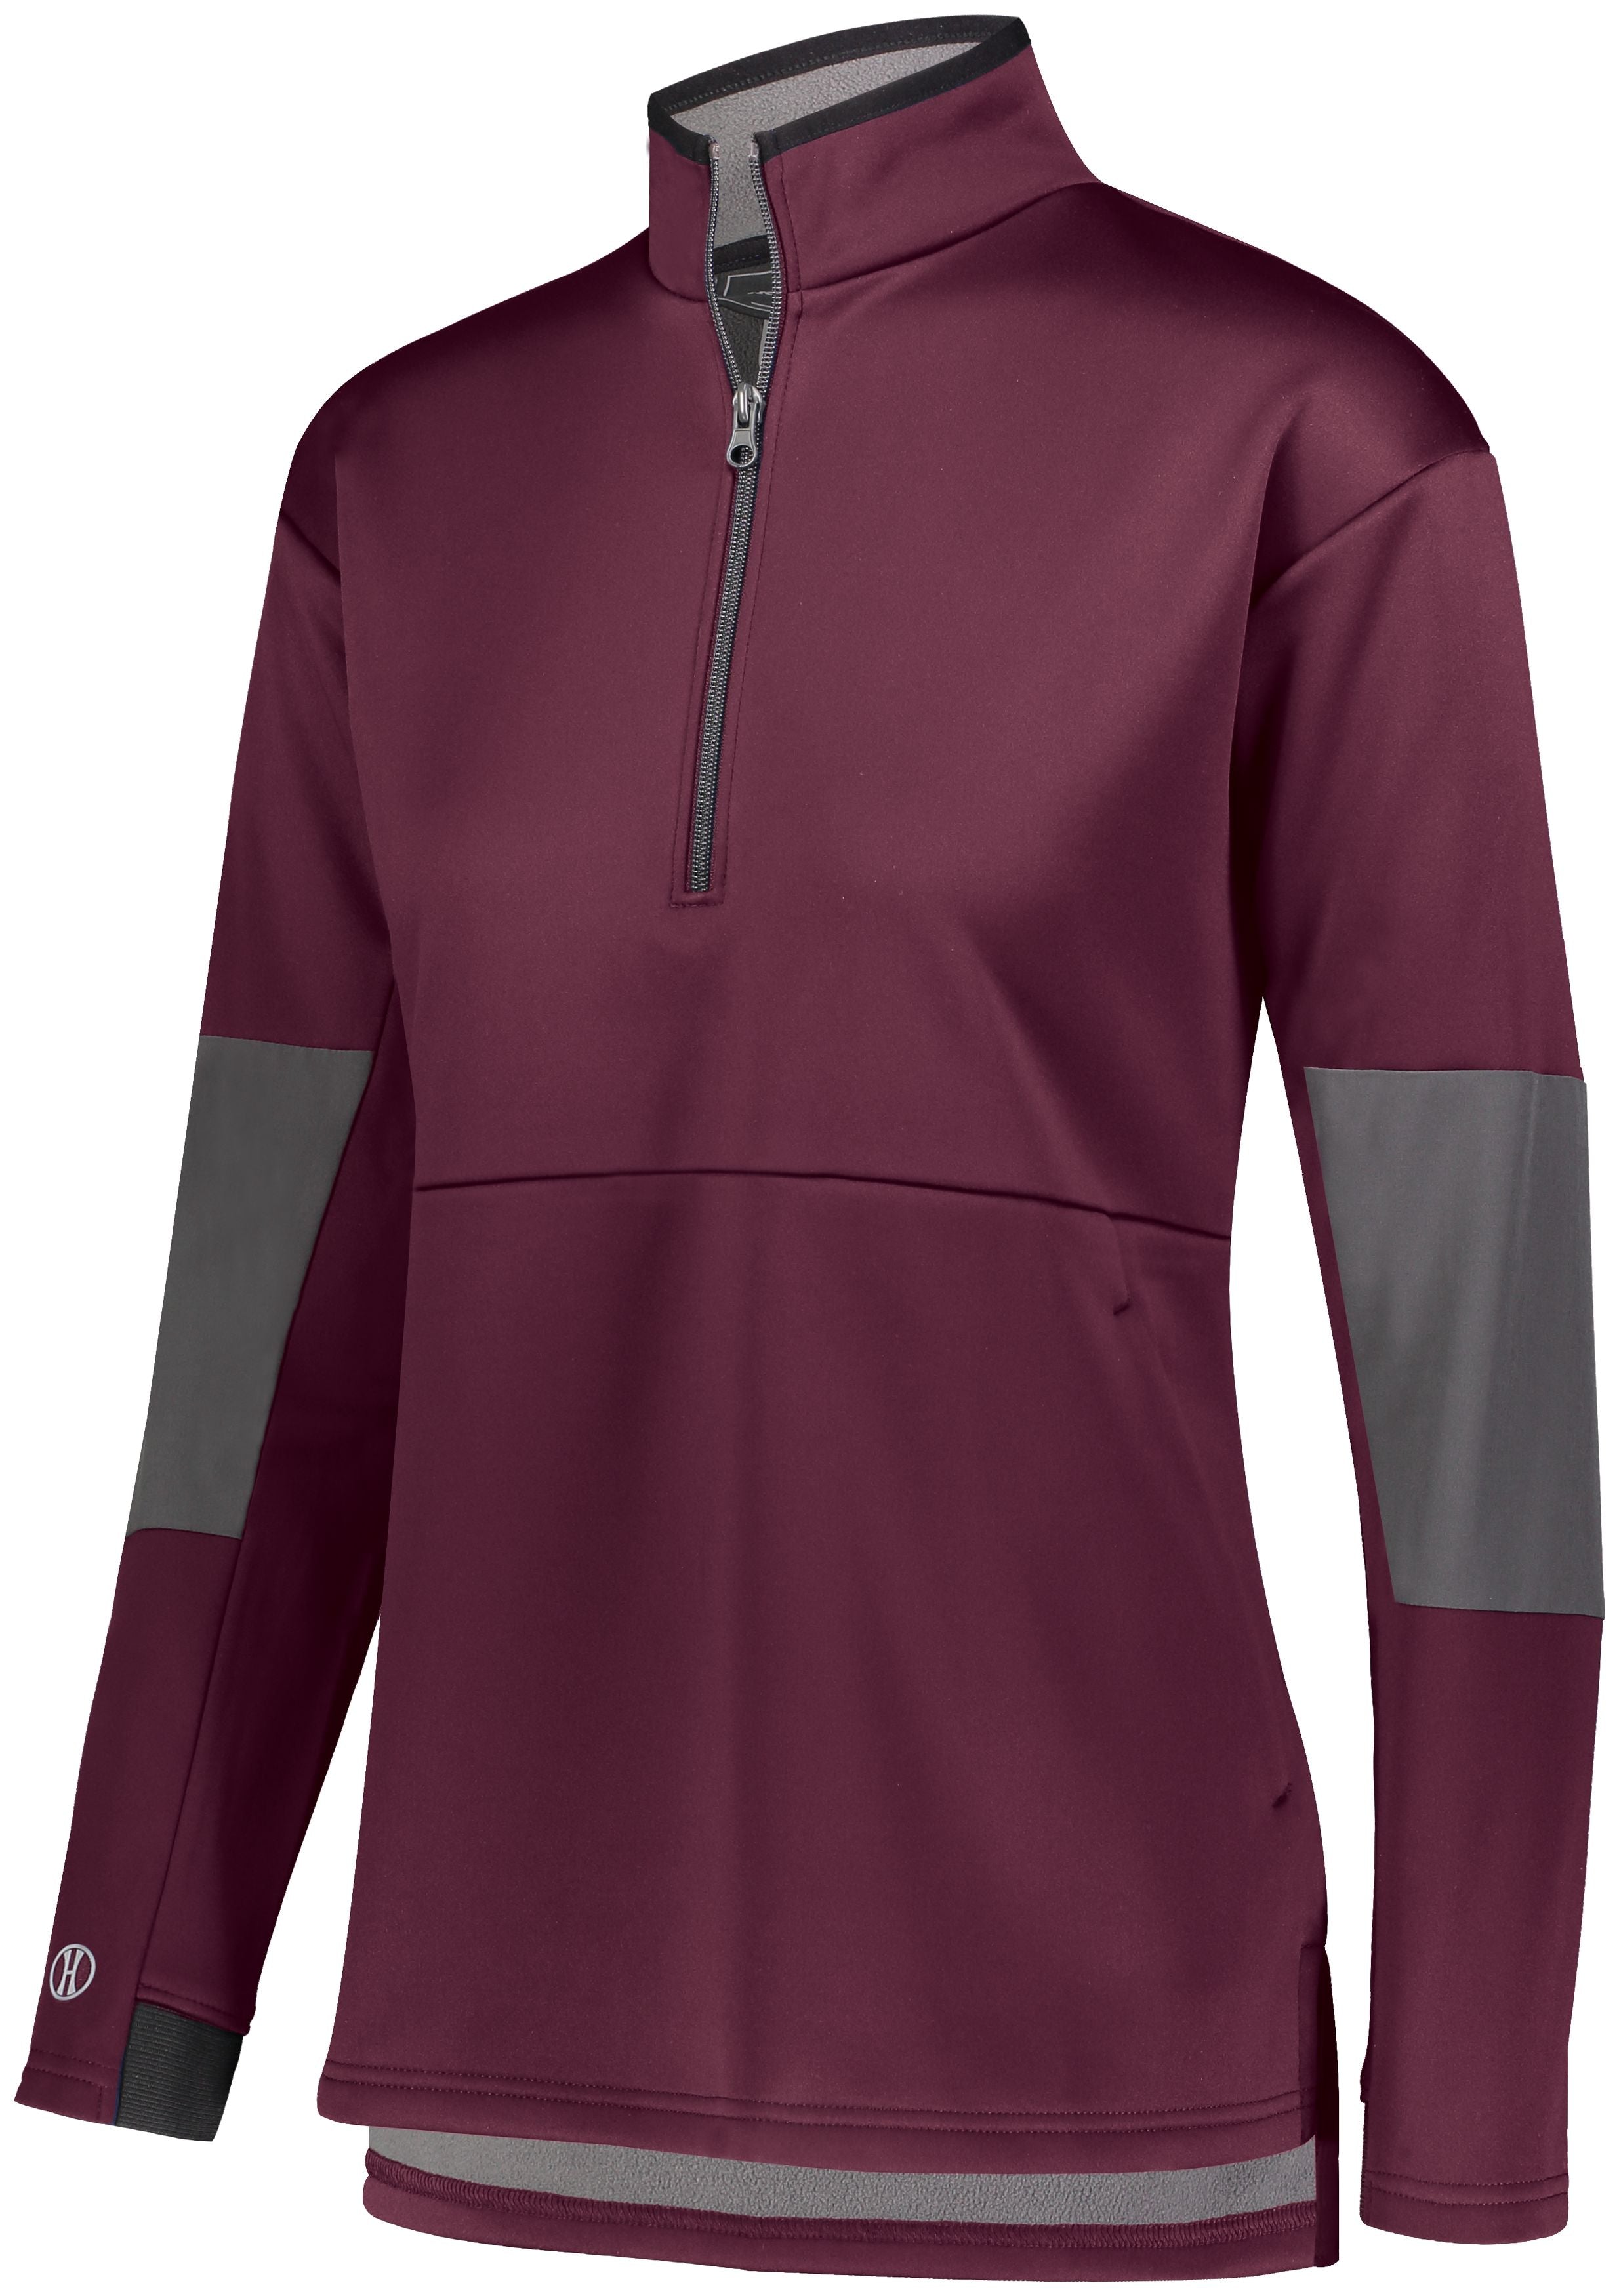 Holloway Ladies Sof-Stretch Pullover in Maroon/Carbon  -Part of the Ladies, Ladies-Pullover, Holloway, Outerwear product lines at KanaleyCreations.com